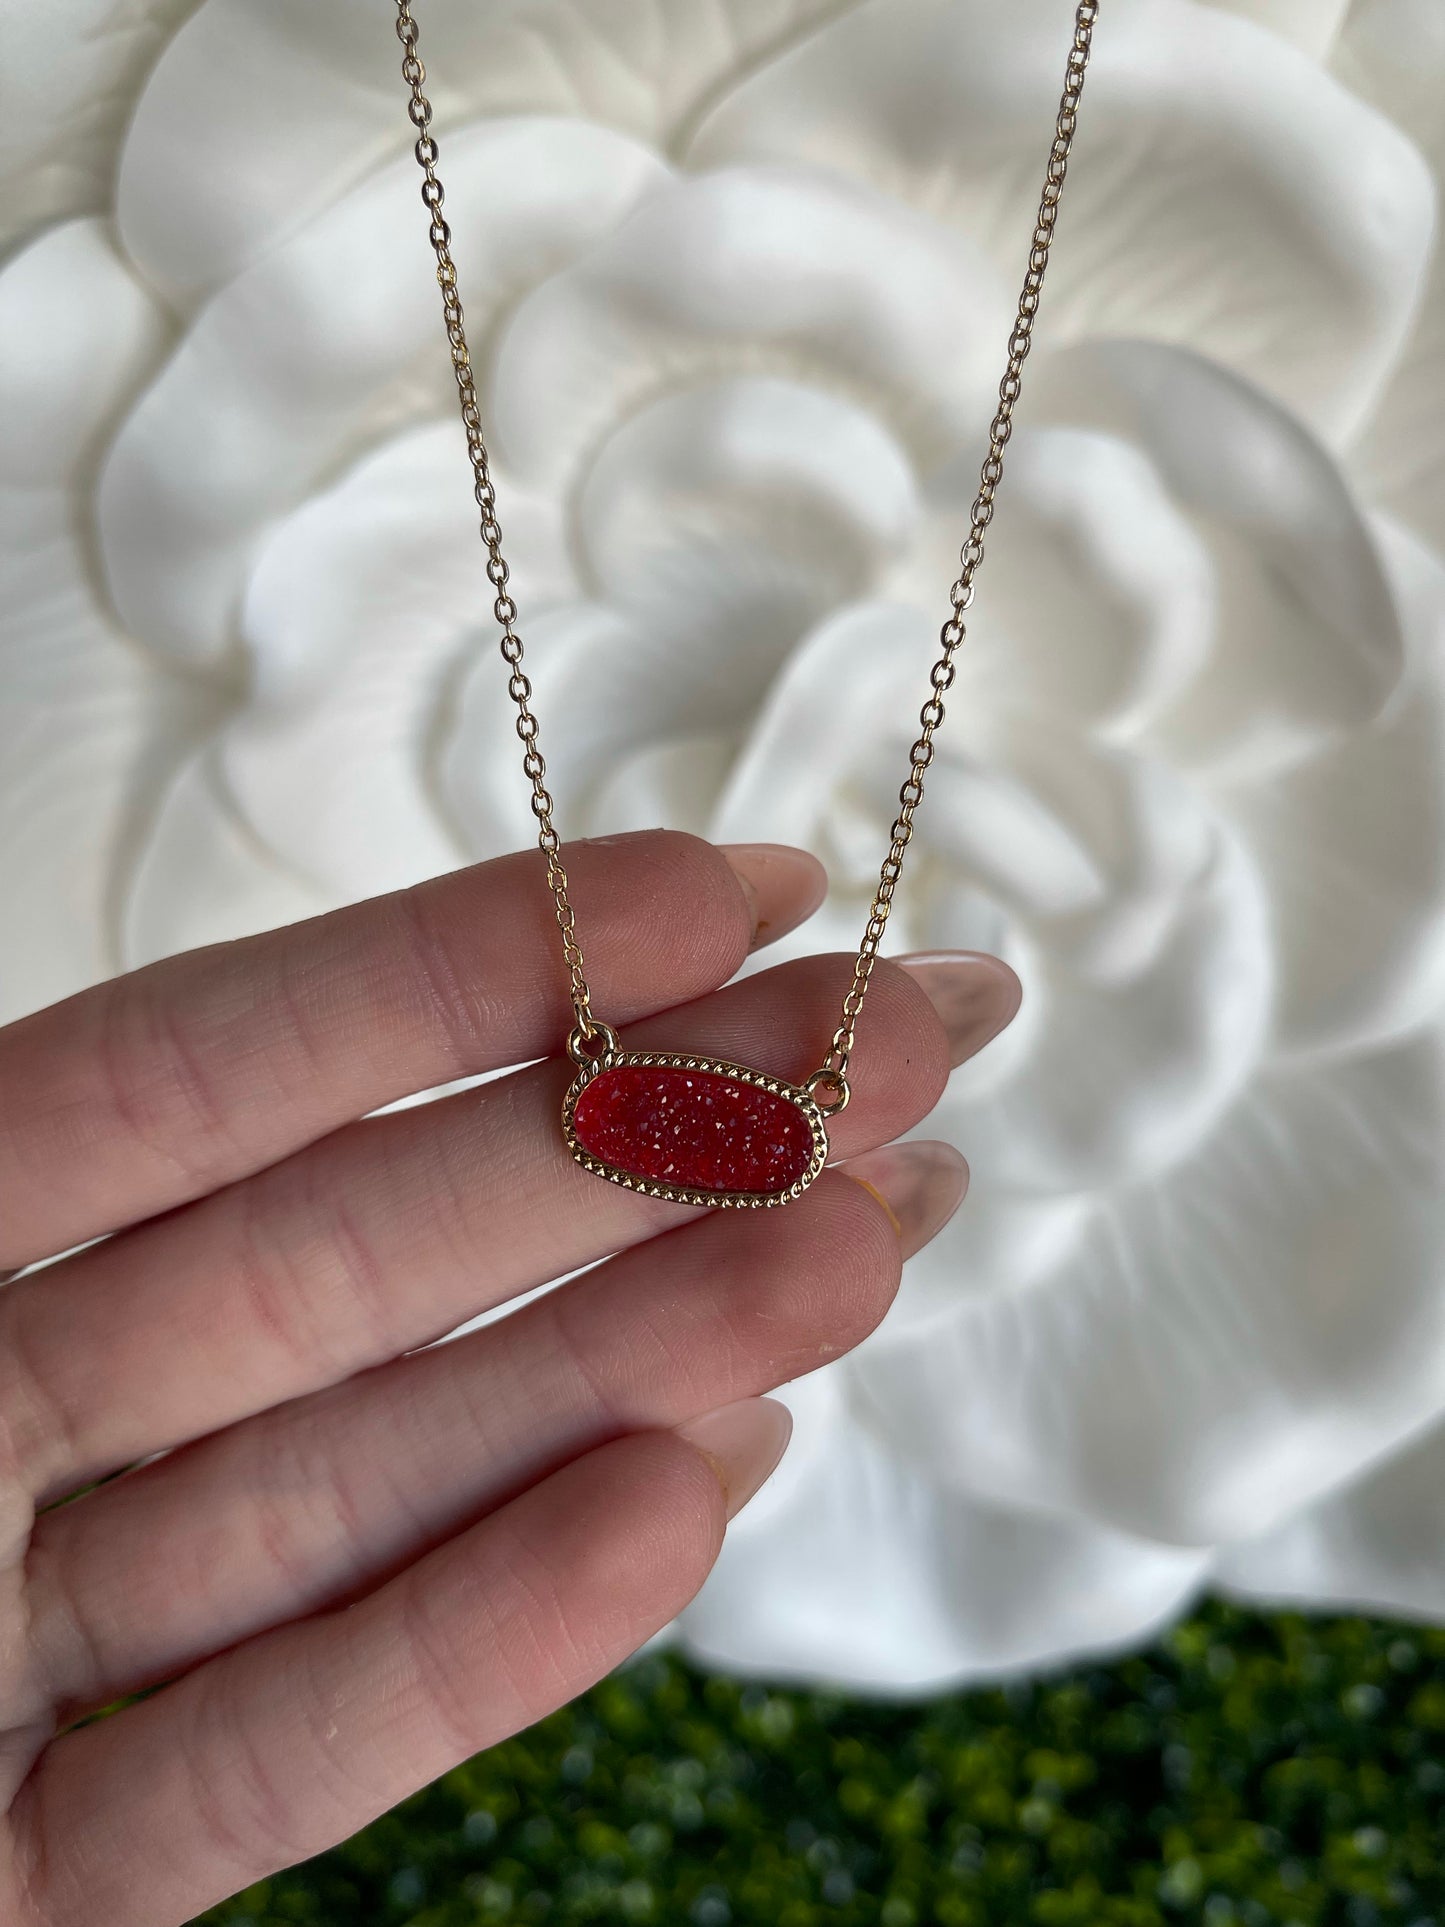 Dainty Oval Druzy Pendant Necklace & Earrings Set - Red on Gold